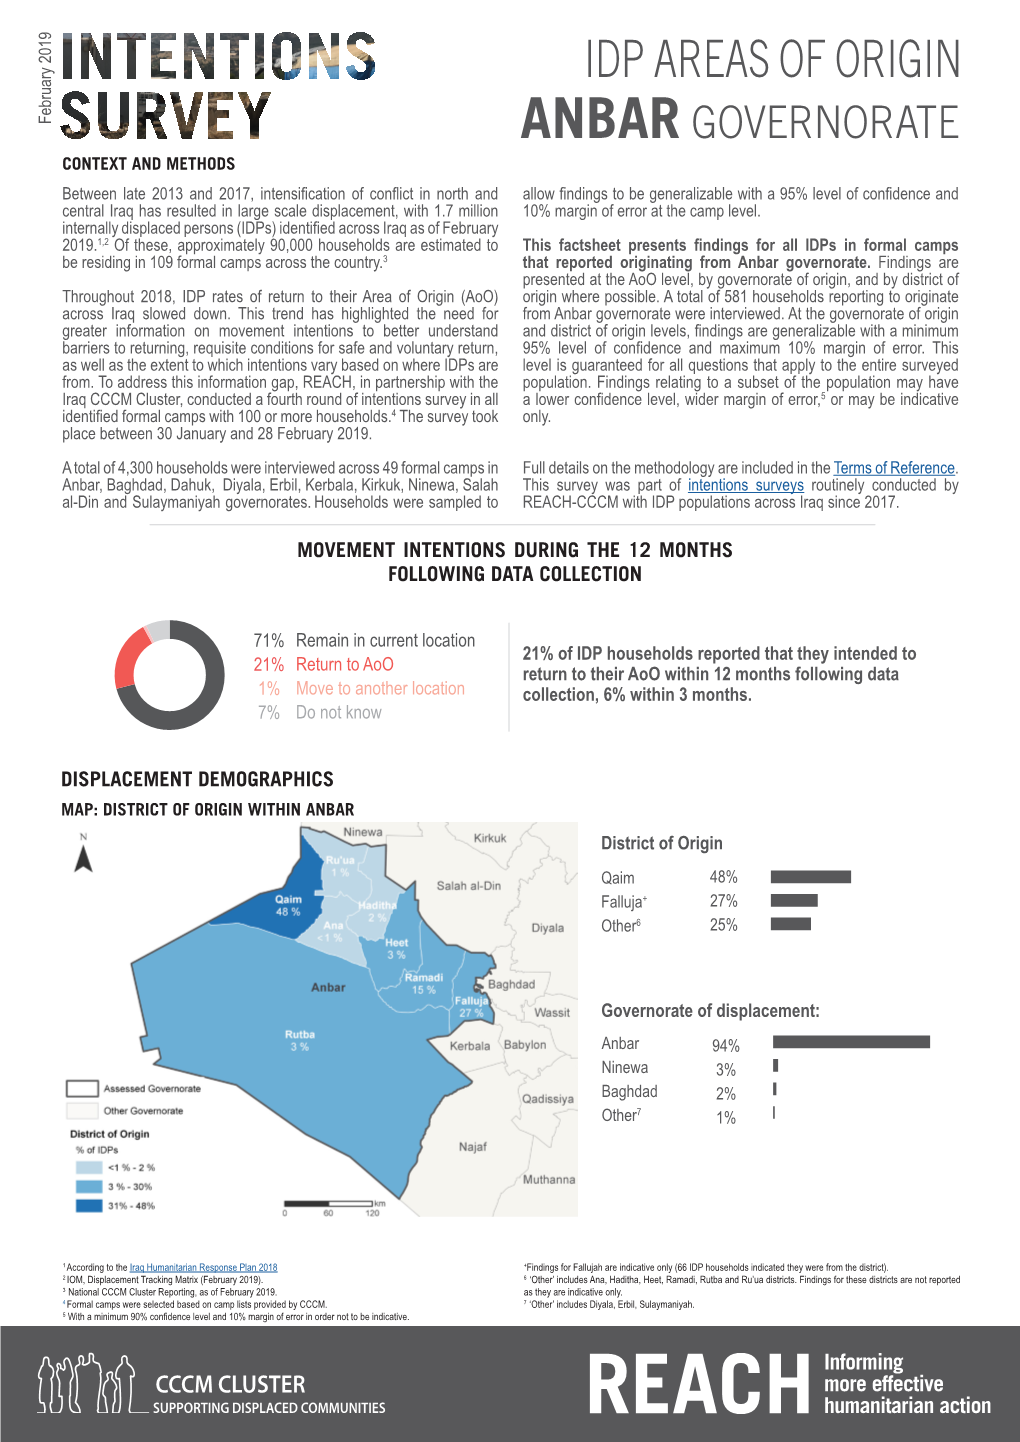 IDP Areas of Origin, February 2019 ANBAR, P.2 MOVEMENT INTENTIONS by DISTRICT of ORIGIN